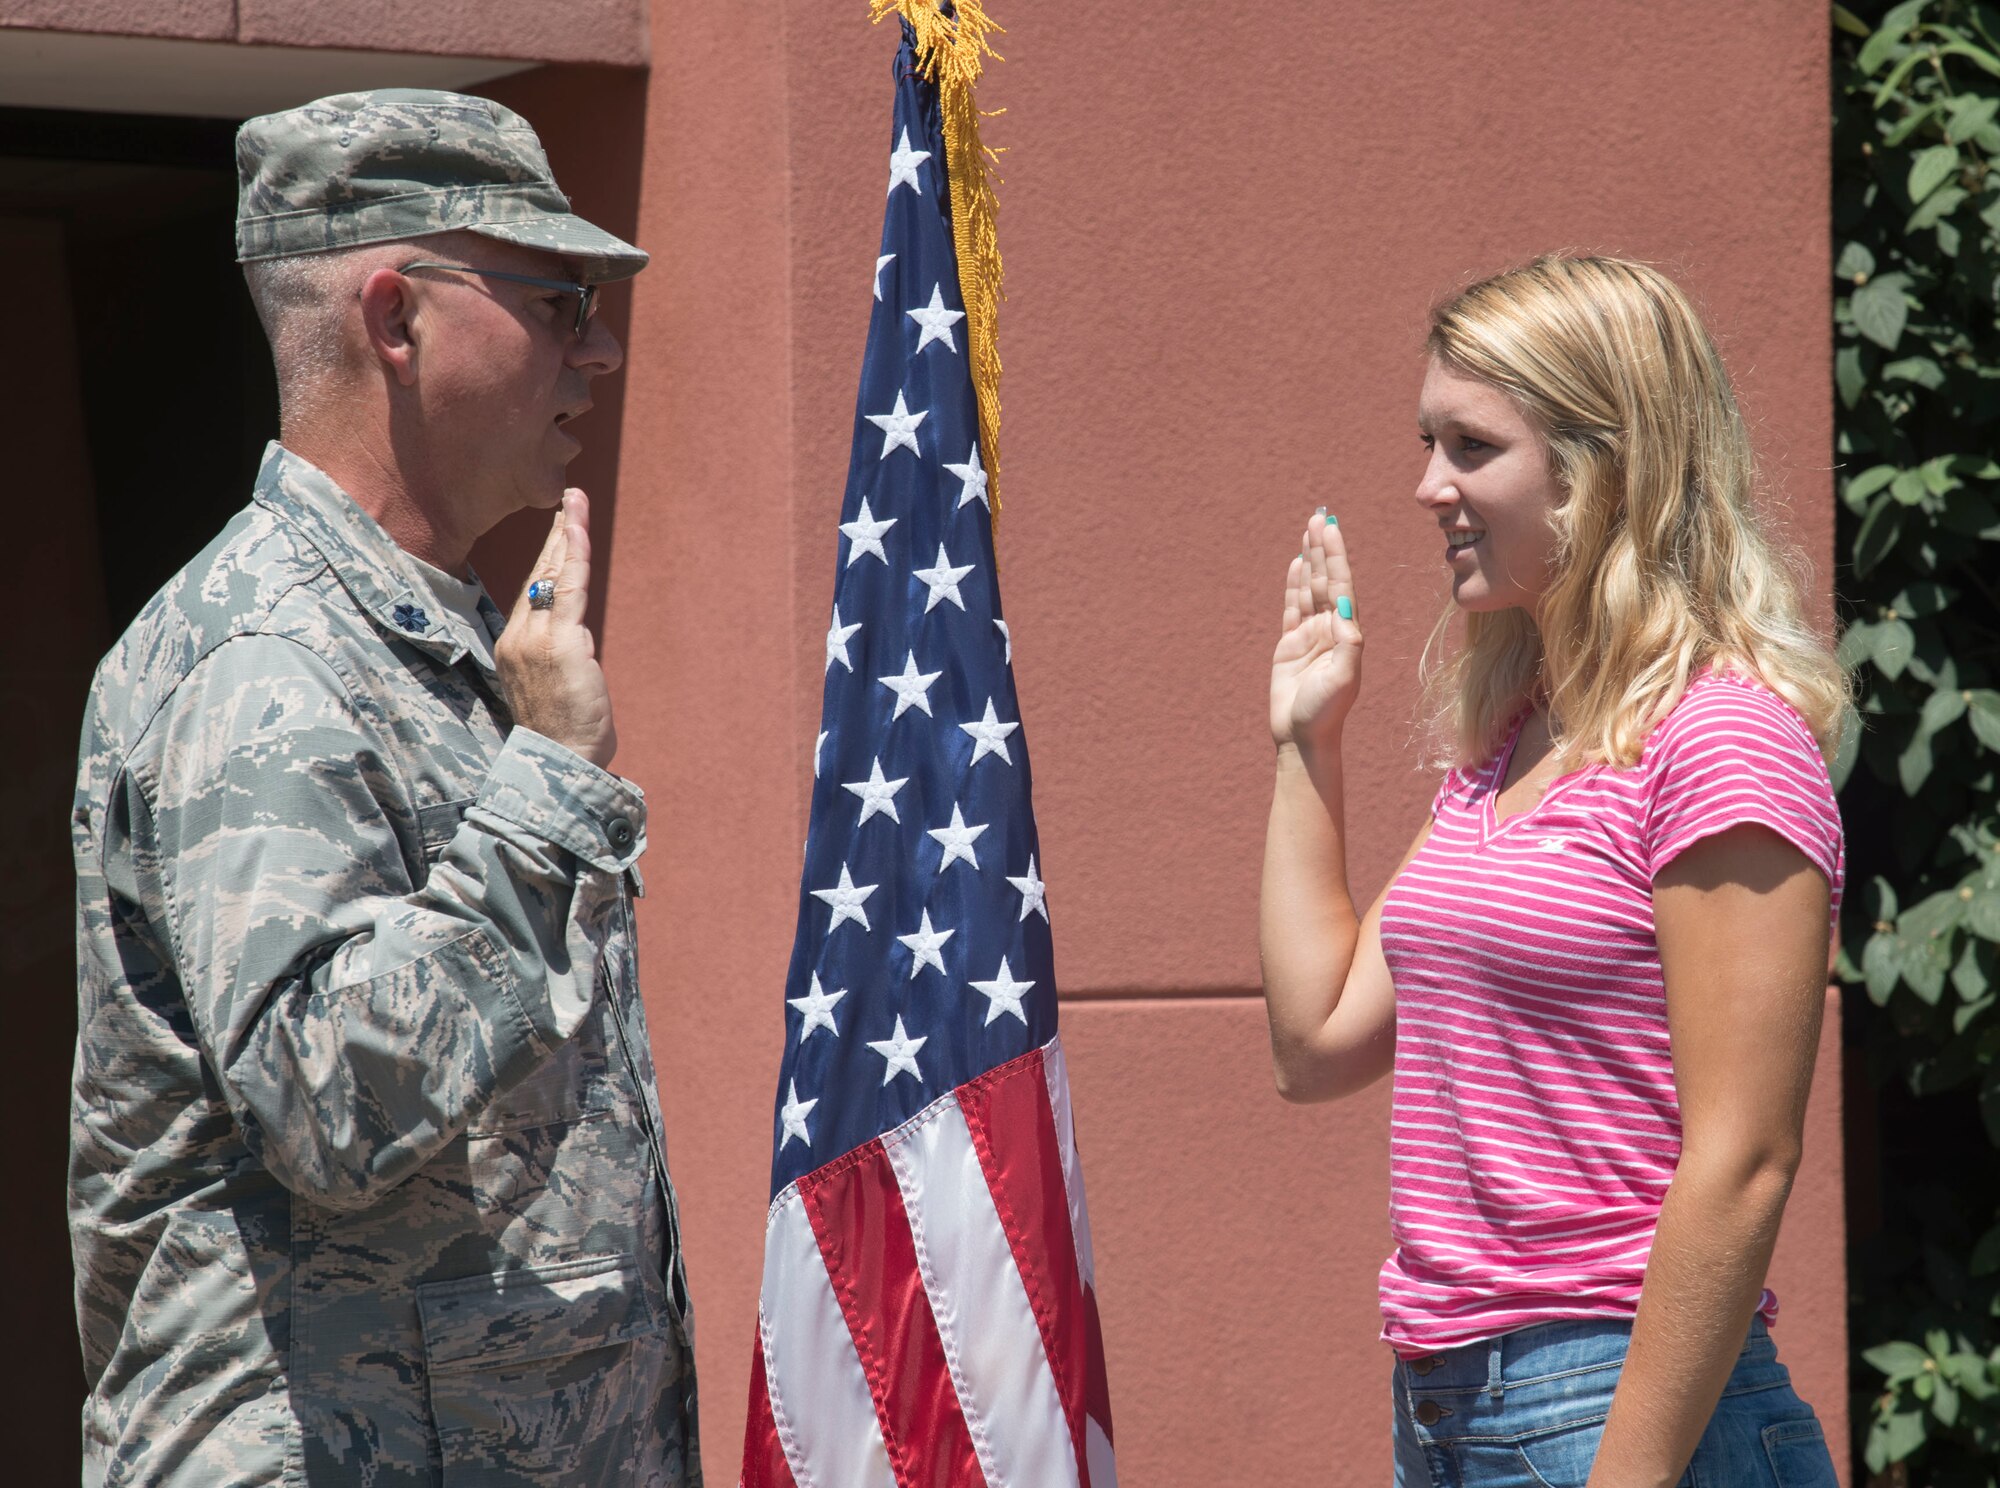 Cara Anderson, recites the Oath of Enlistment given by Lt. Col. Stan Paregien, 932nd Airlift Wing Public Affairs officer, July 17, 2019, Scott Air Force Base, Illinois. Anderson will soon begin her next chapter in her Air Force story. She said she was always interested in joining the military and enjoys helping others. Anderson is looking forward to the new life style and hopes to one day become a chief master sergeant in the Air Force. (U.S. Air Force photo by Senior Airman Melissa Estevez)